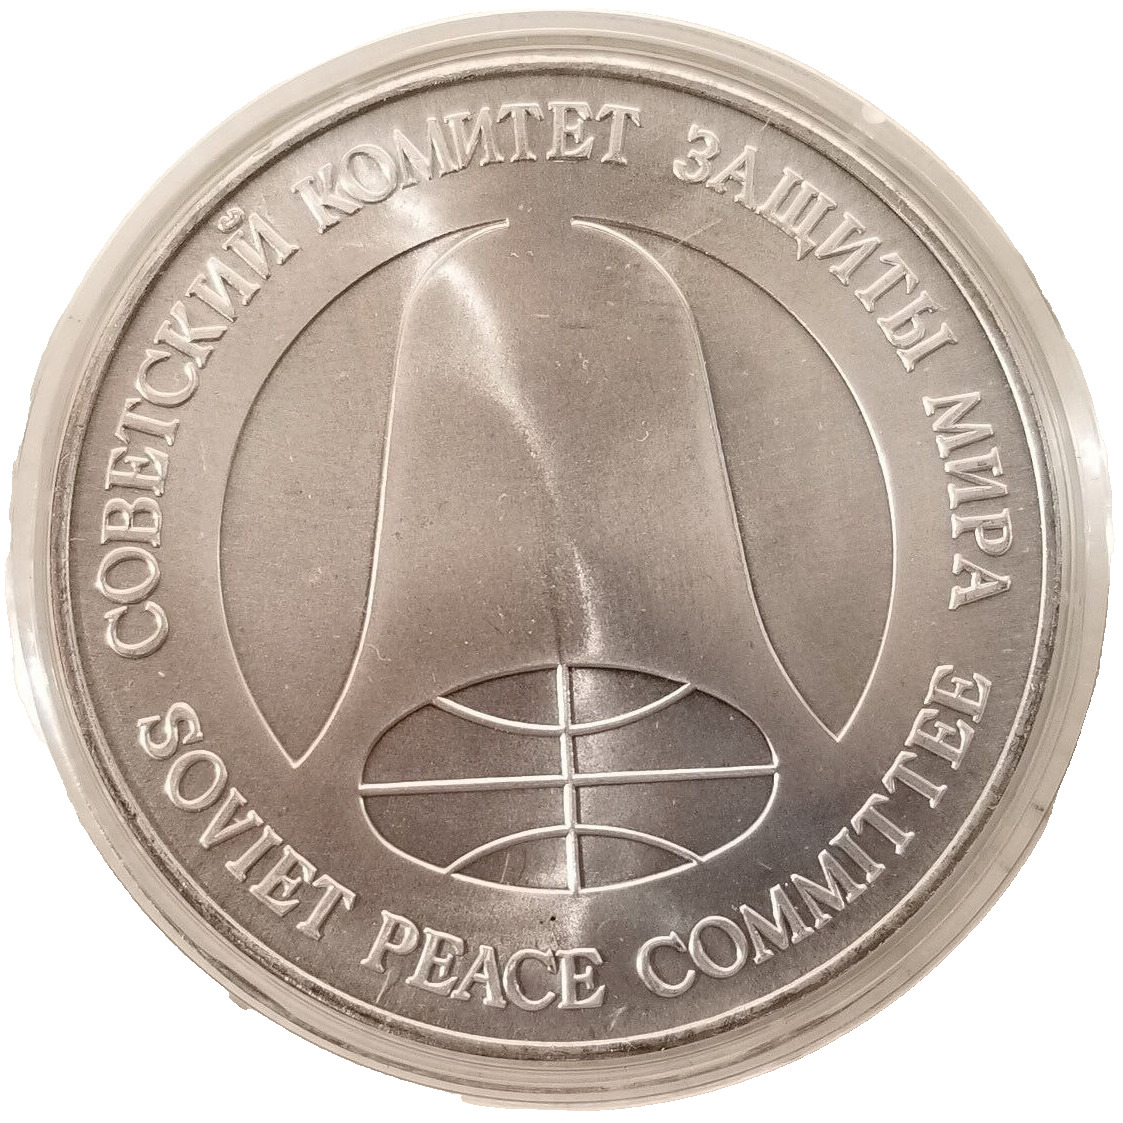 US & USSR INF Treaty Coin Made of Nuclear Missile Metals Decommissioned Cold War